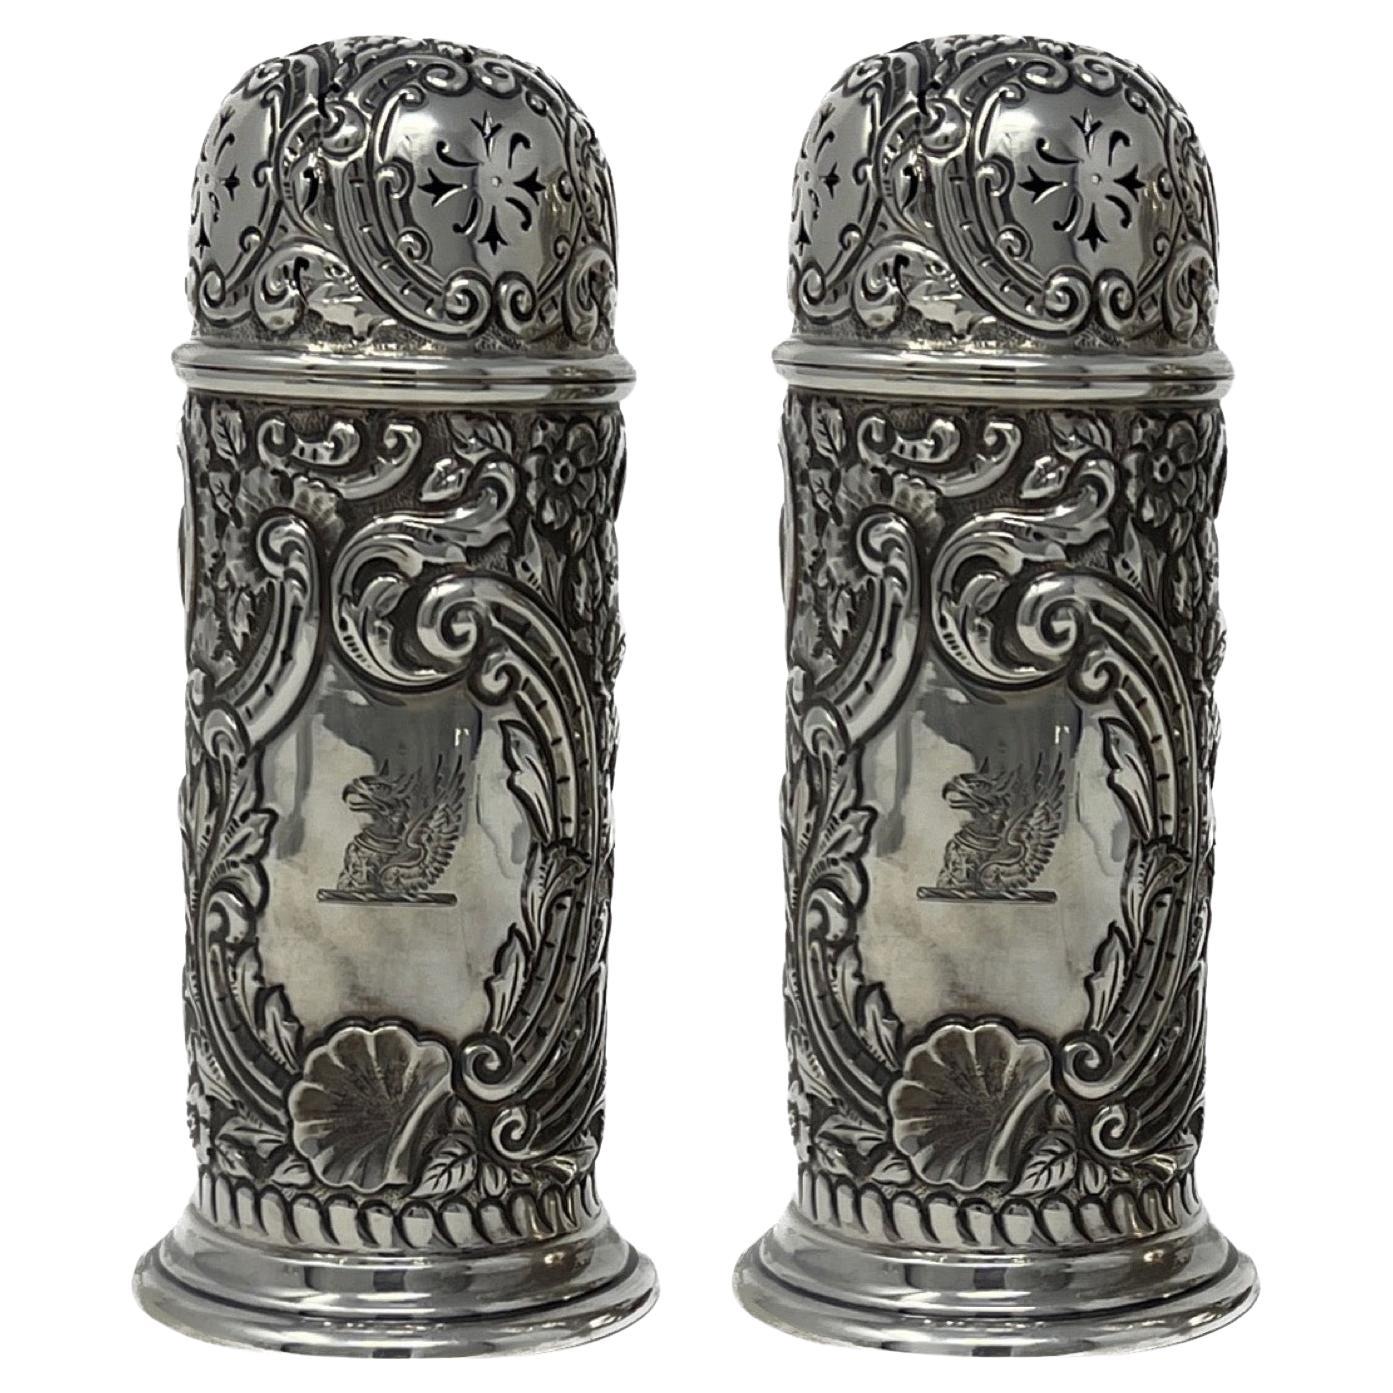 Pair Antique English Sterling Silver Muffineers / Salt & Pepper Shakers, Ca 1880